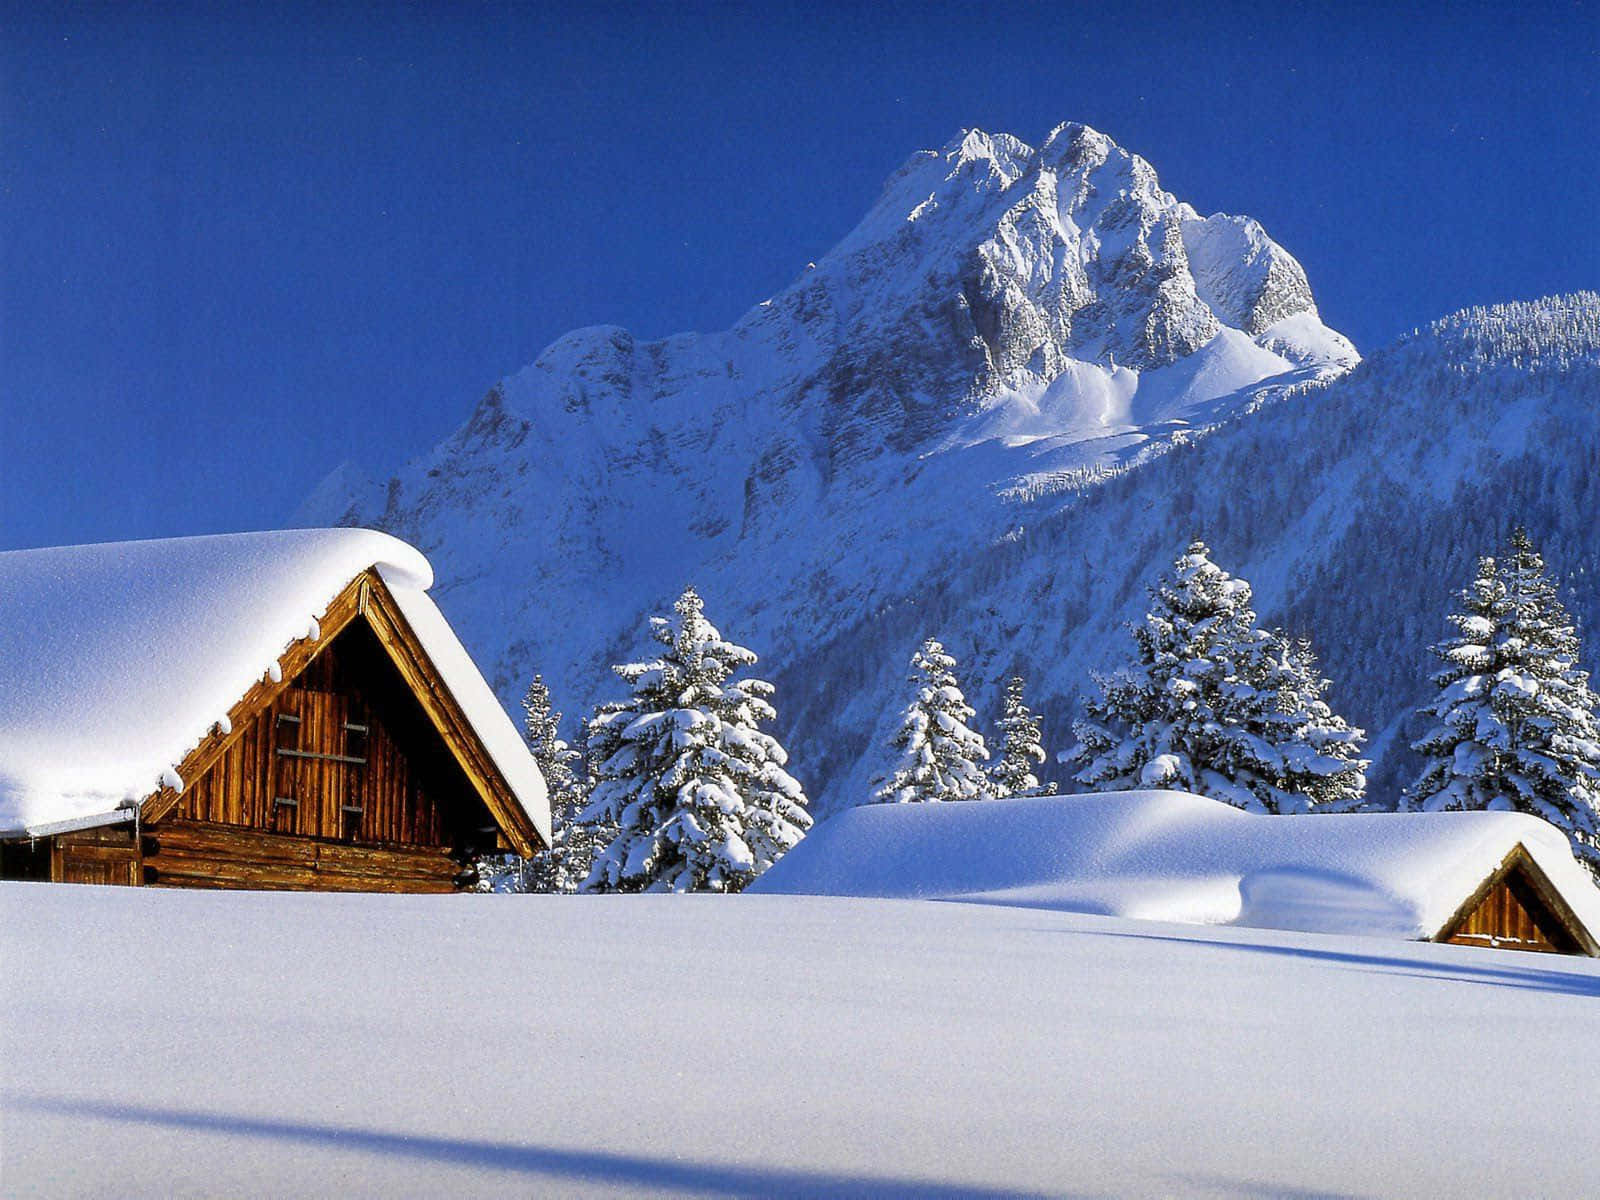 A Snow Covered Mountain With A Cabin In The Background